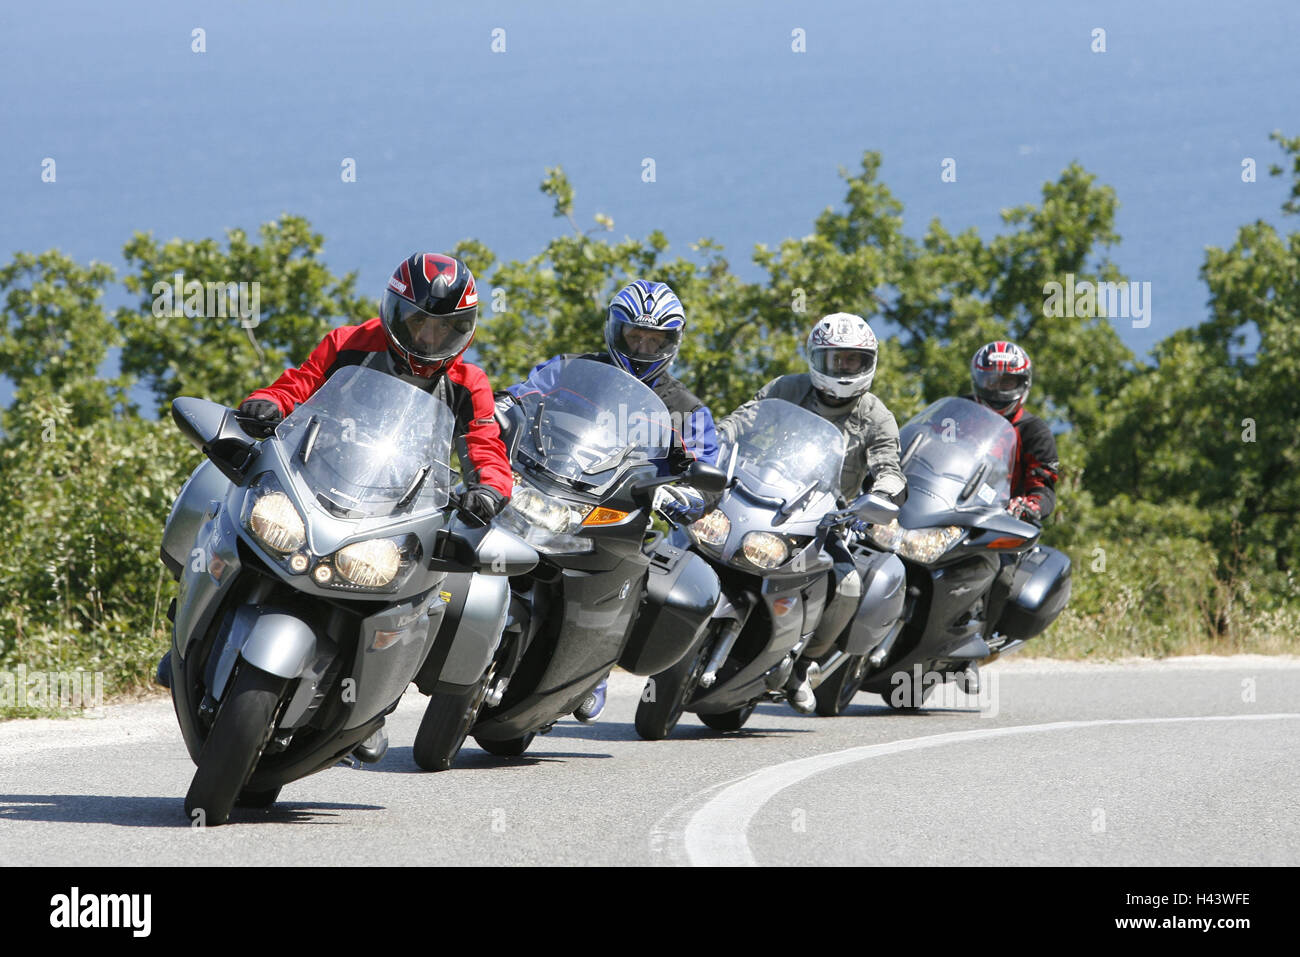 Tourer VT, group, country road, bend, 4th formation, scenery, motorcycle group, person, driver, motorcyclist, four, one after the other, together, motorcycles, motion, street, Tourer, go, front view, Stock Photo